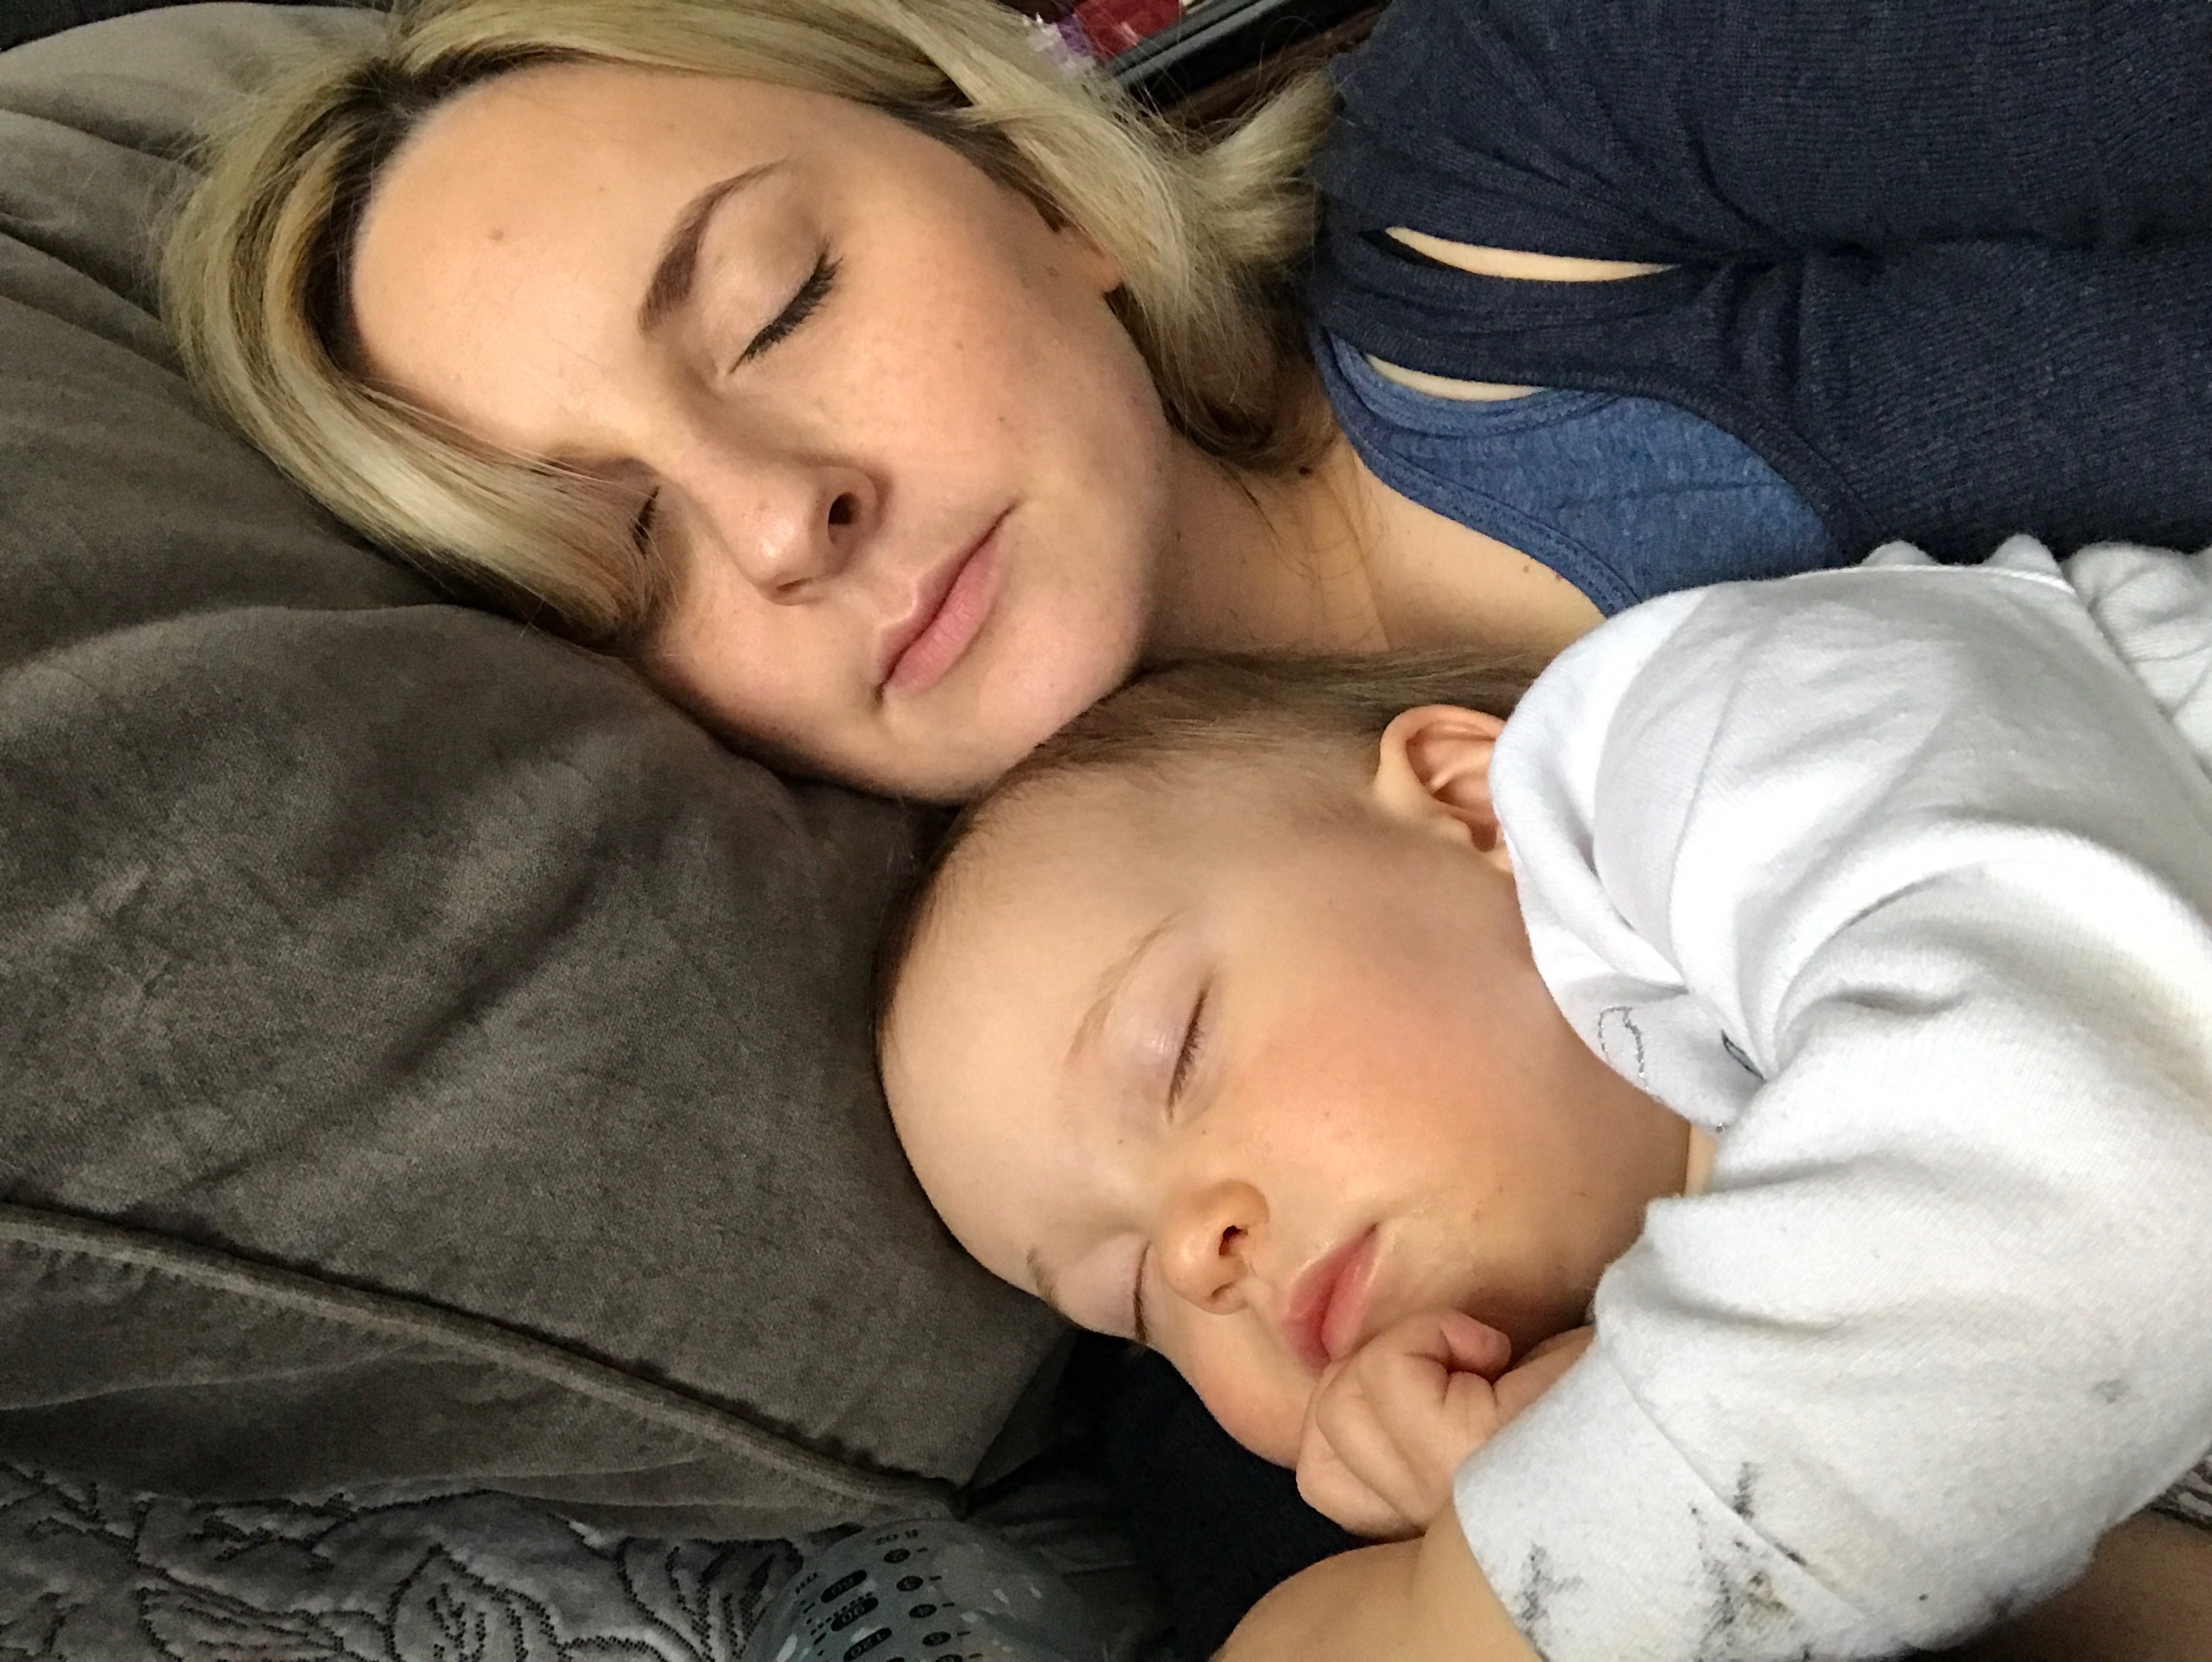 How we ended up co-sleeping and why I’m ok with that